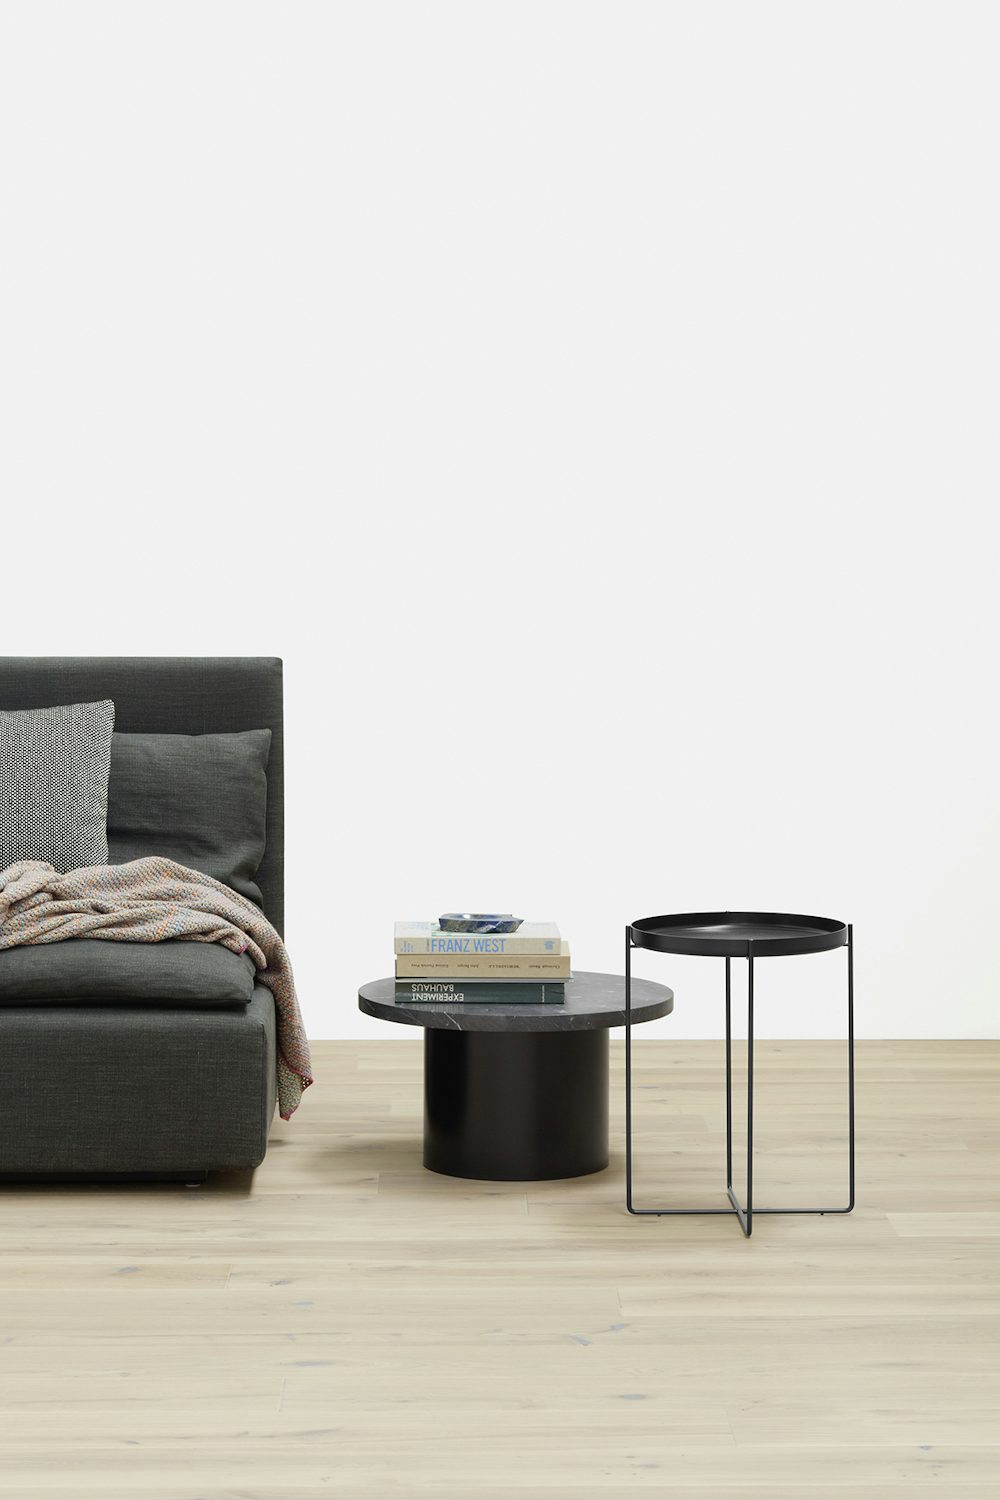 e15 habibi side table with enoki table